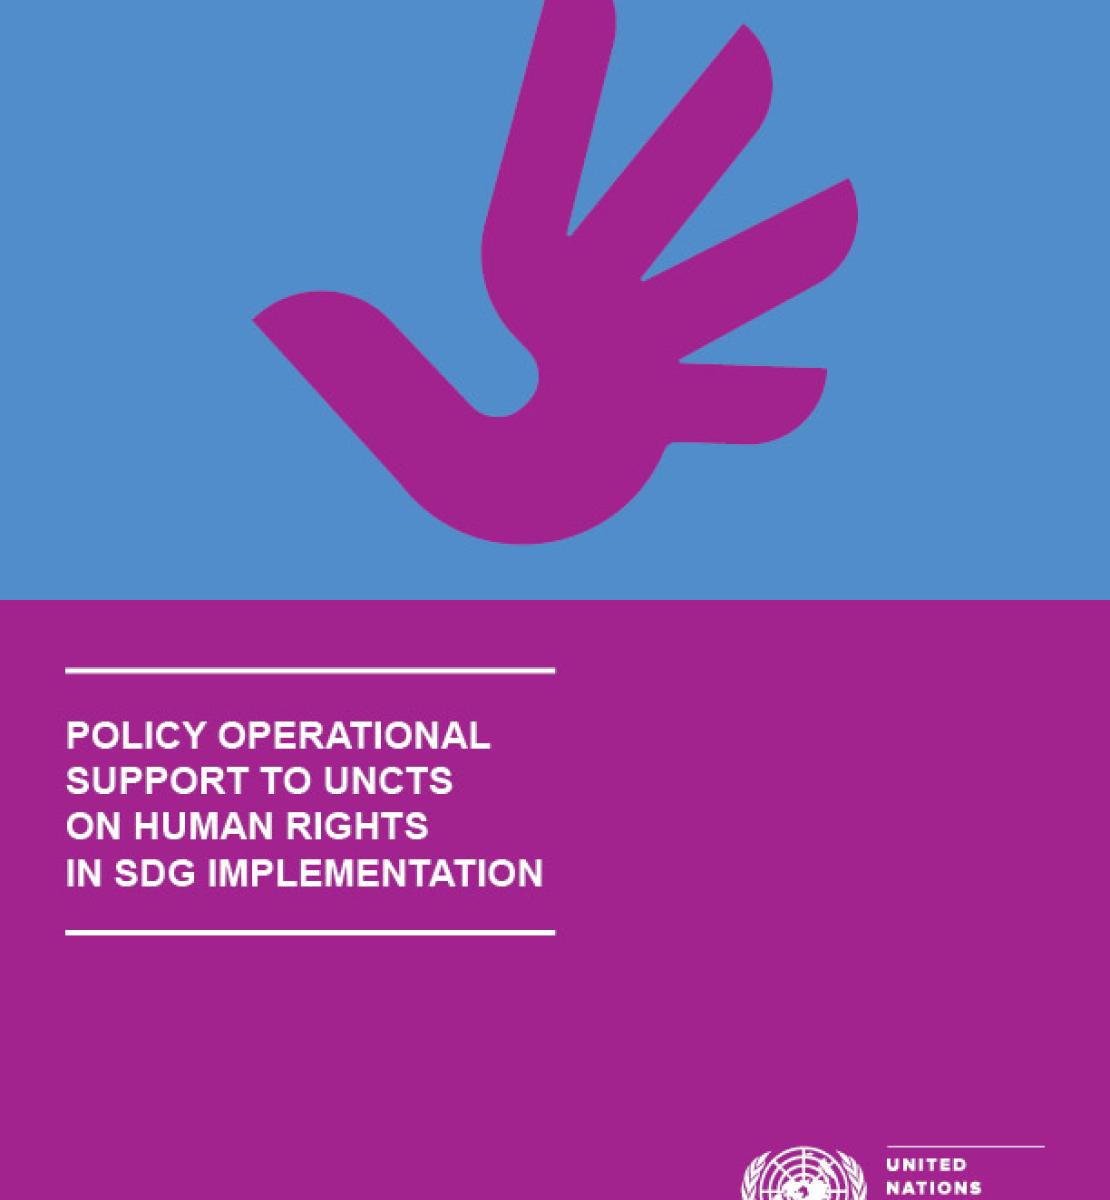 Policy and Operational Support for UNCTs on Human Rights in SDG Implementation